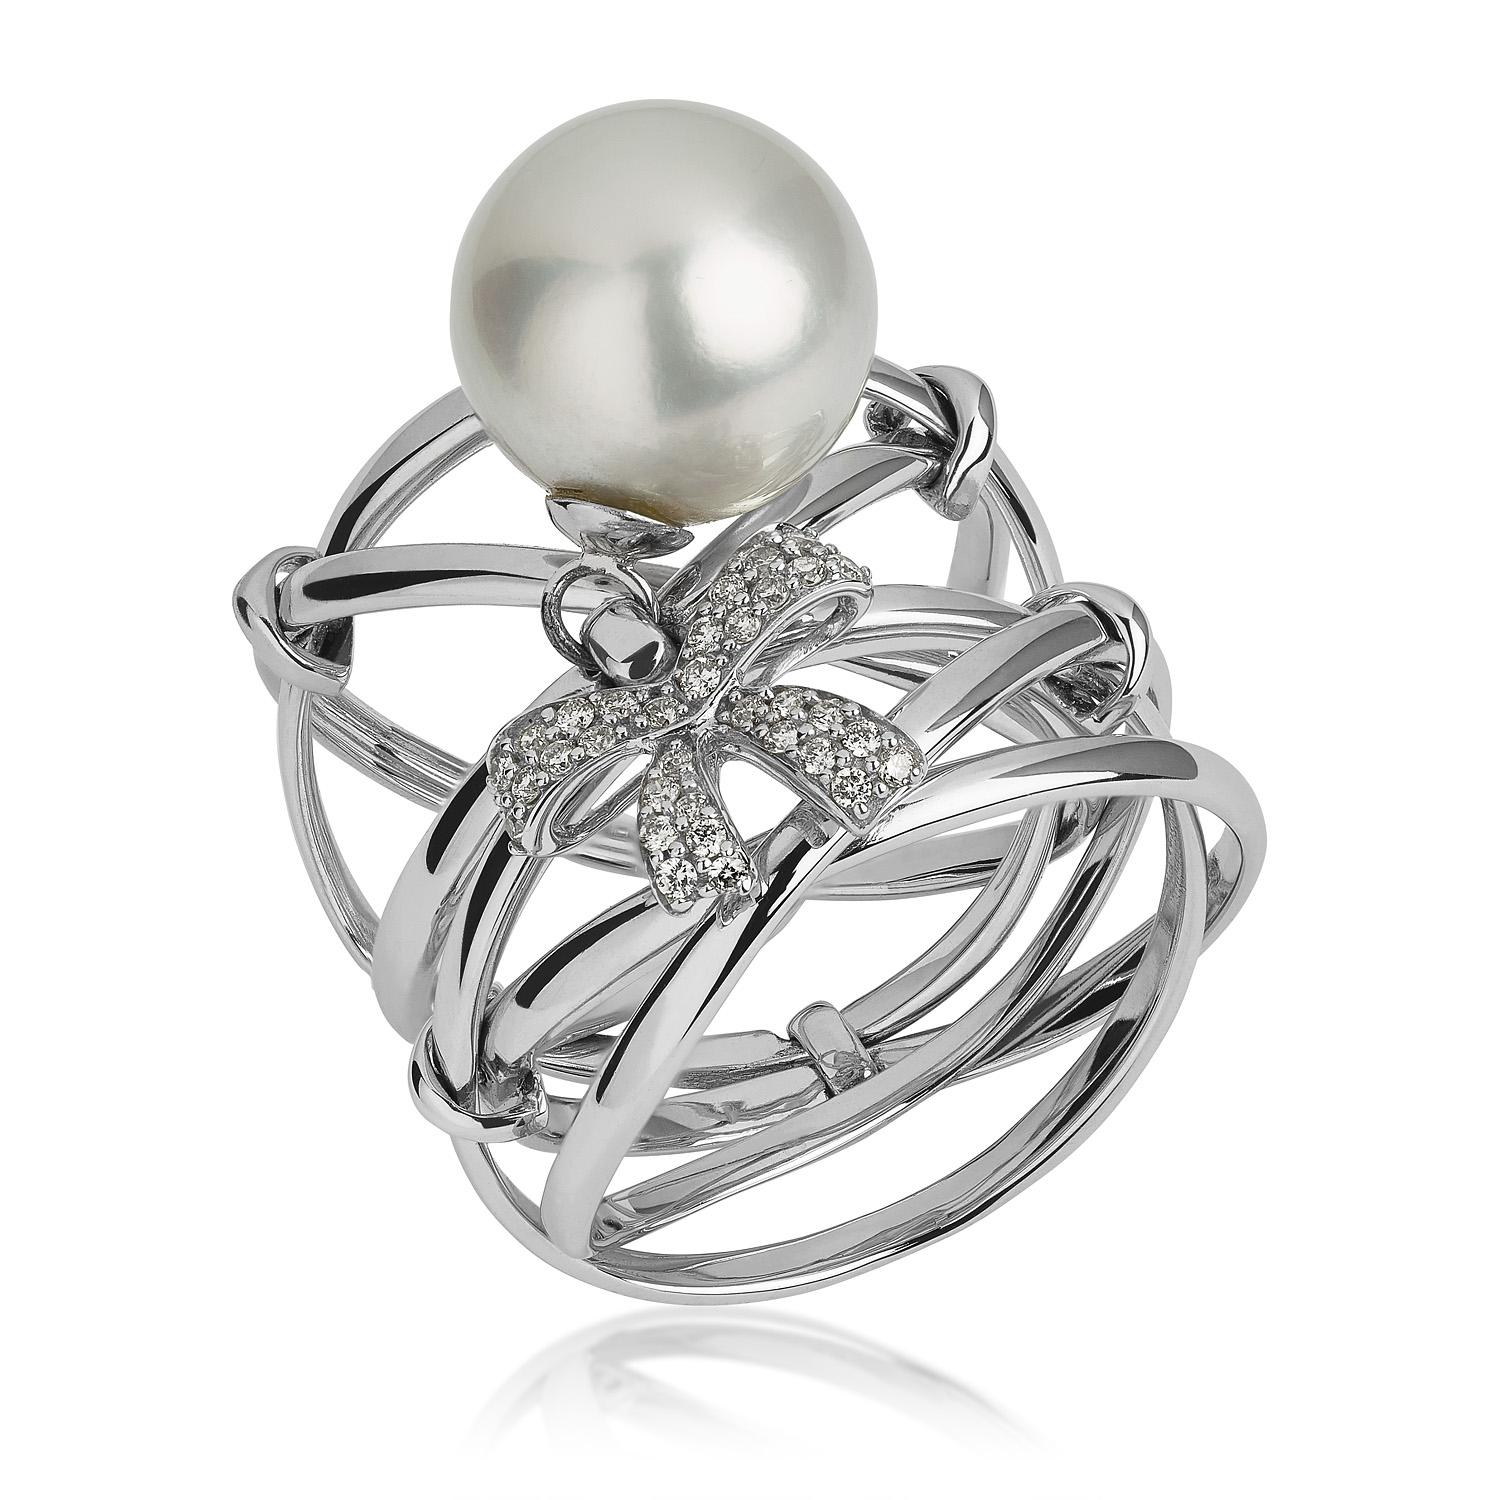 For Sale:  18 Karat Romance White Gold Ring With Vs-Gh Diamonds And White Pearl 3